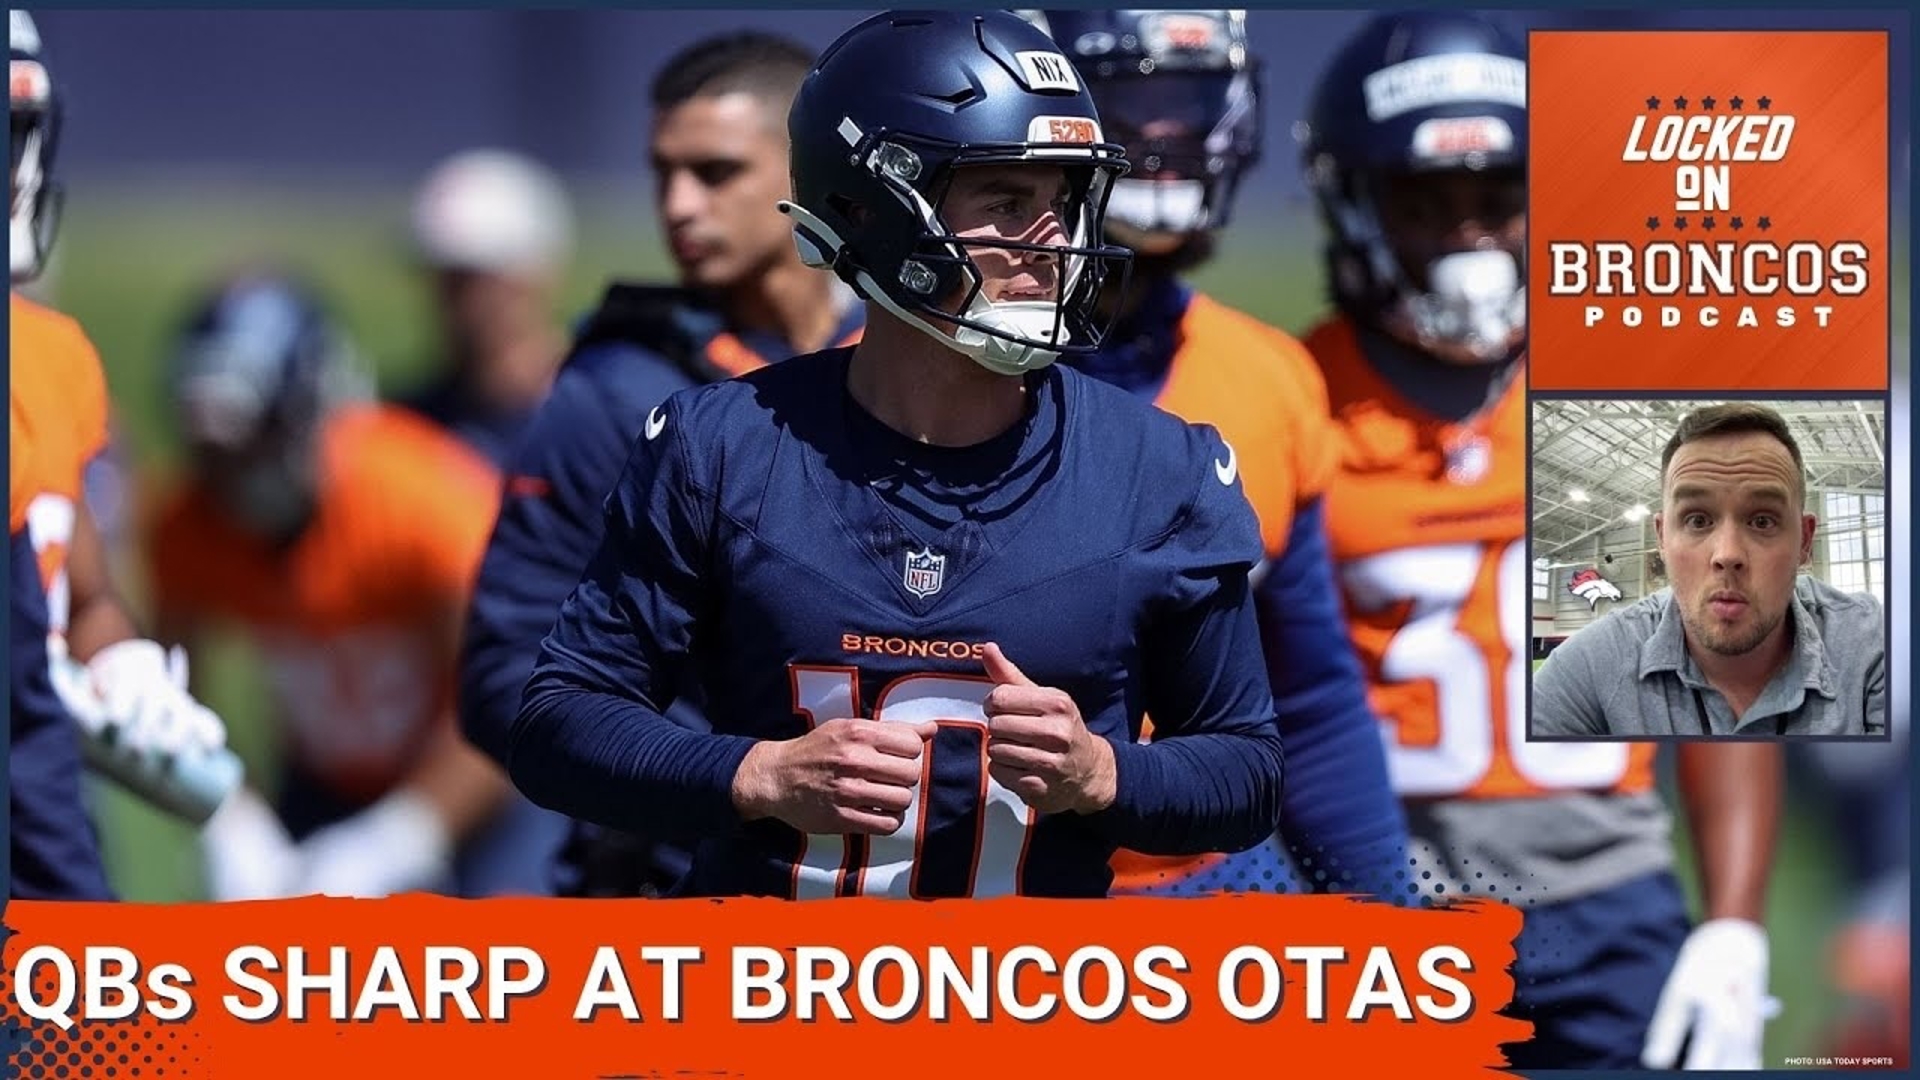 The Denver Broncos QB competition continued on Thursday with Bo Nix and Jarrett Stidham having sharp days running the Broncos offense.